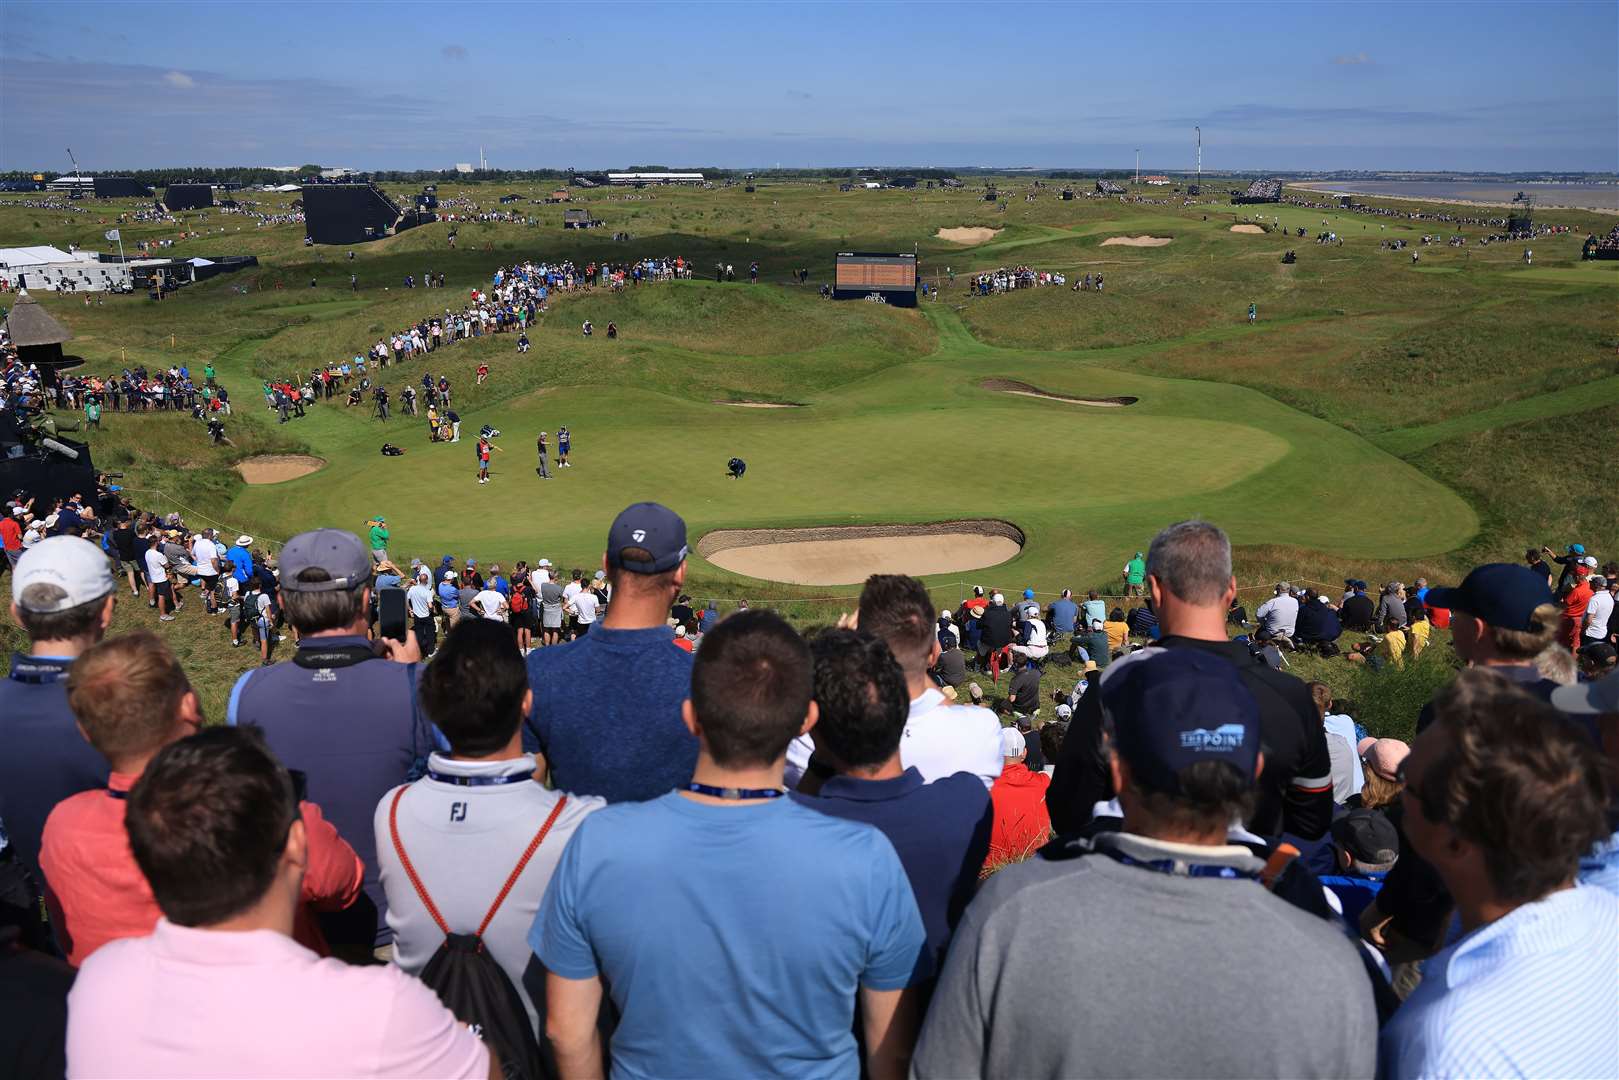 Thousands attended The 149th Open in Sandwich each day between July 11 and 18. Photo by Matthew Lewis/R&A/R&A via Getty Images.